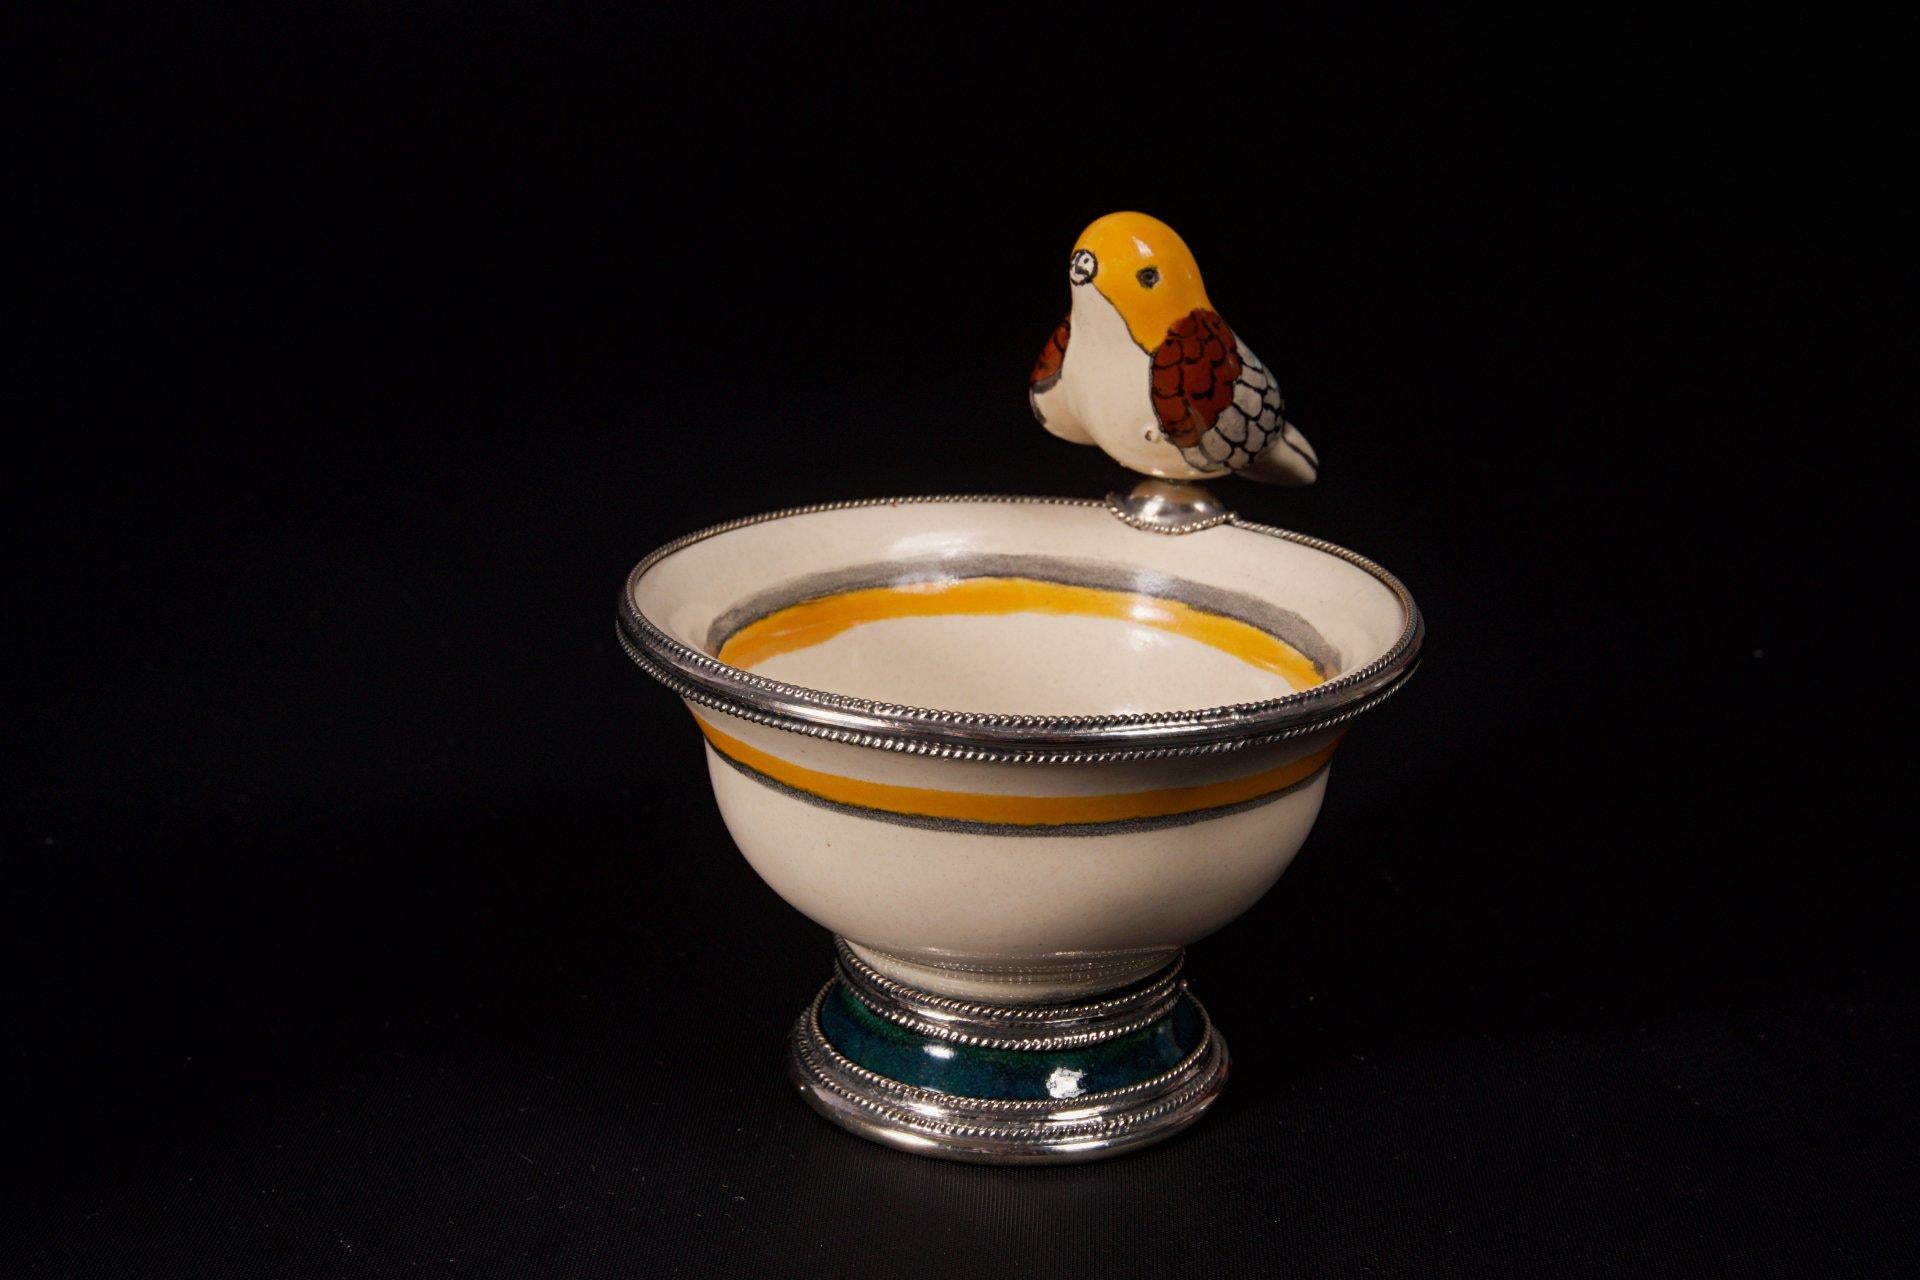 Always unique pieces are what you are going to hear about Jesus Guerrero Santo's work, all the pieces are handmade and created one by one it takes months to produce each peace. This ceramic and white metal (alpaca) bowl centerpiece, was created in